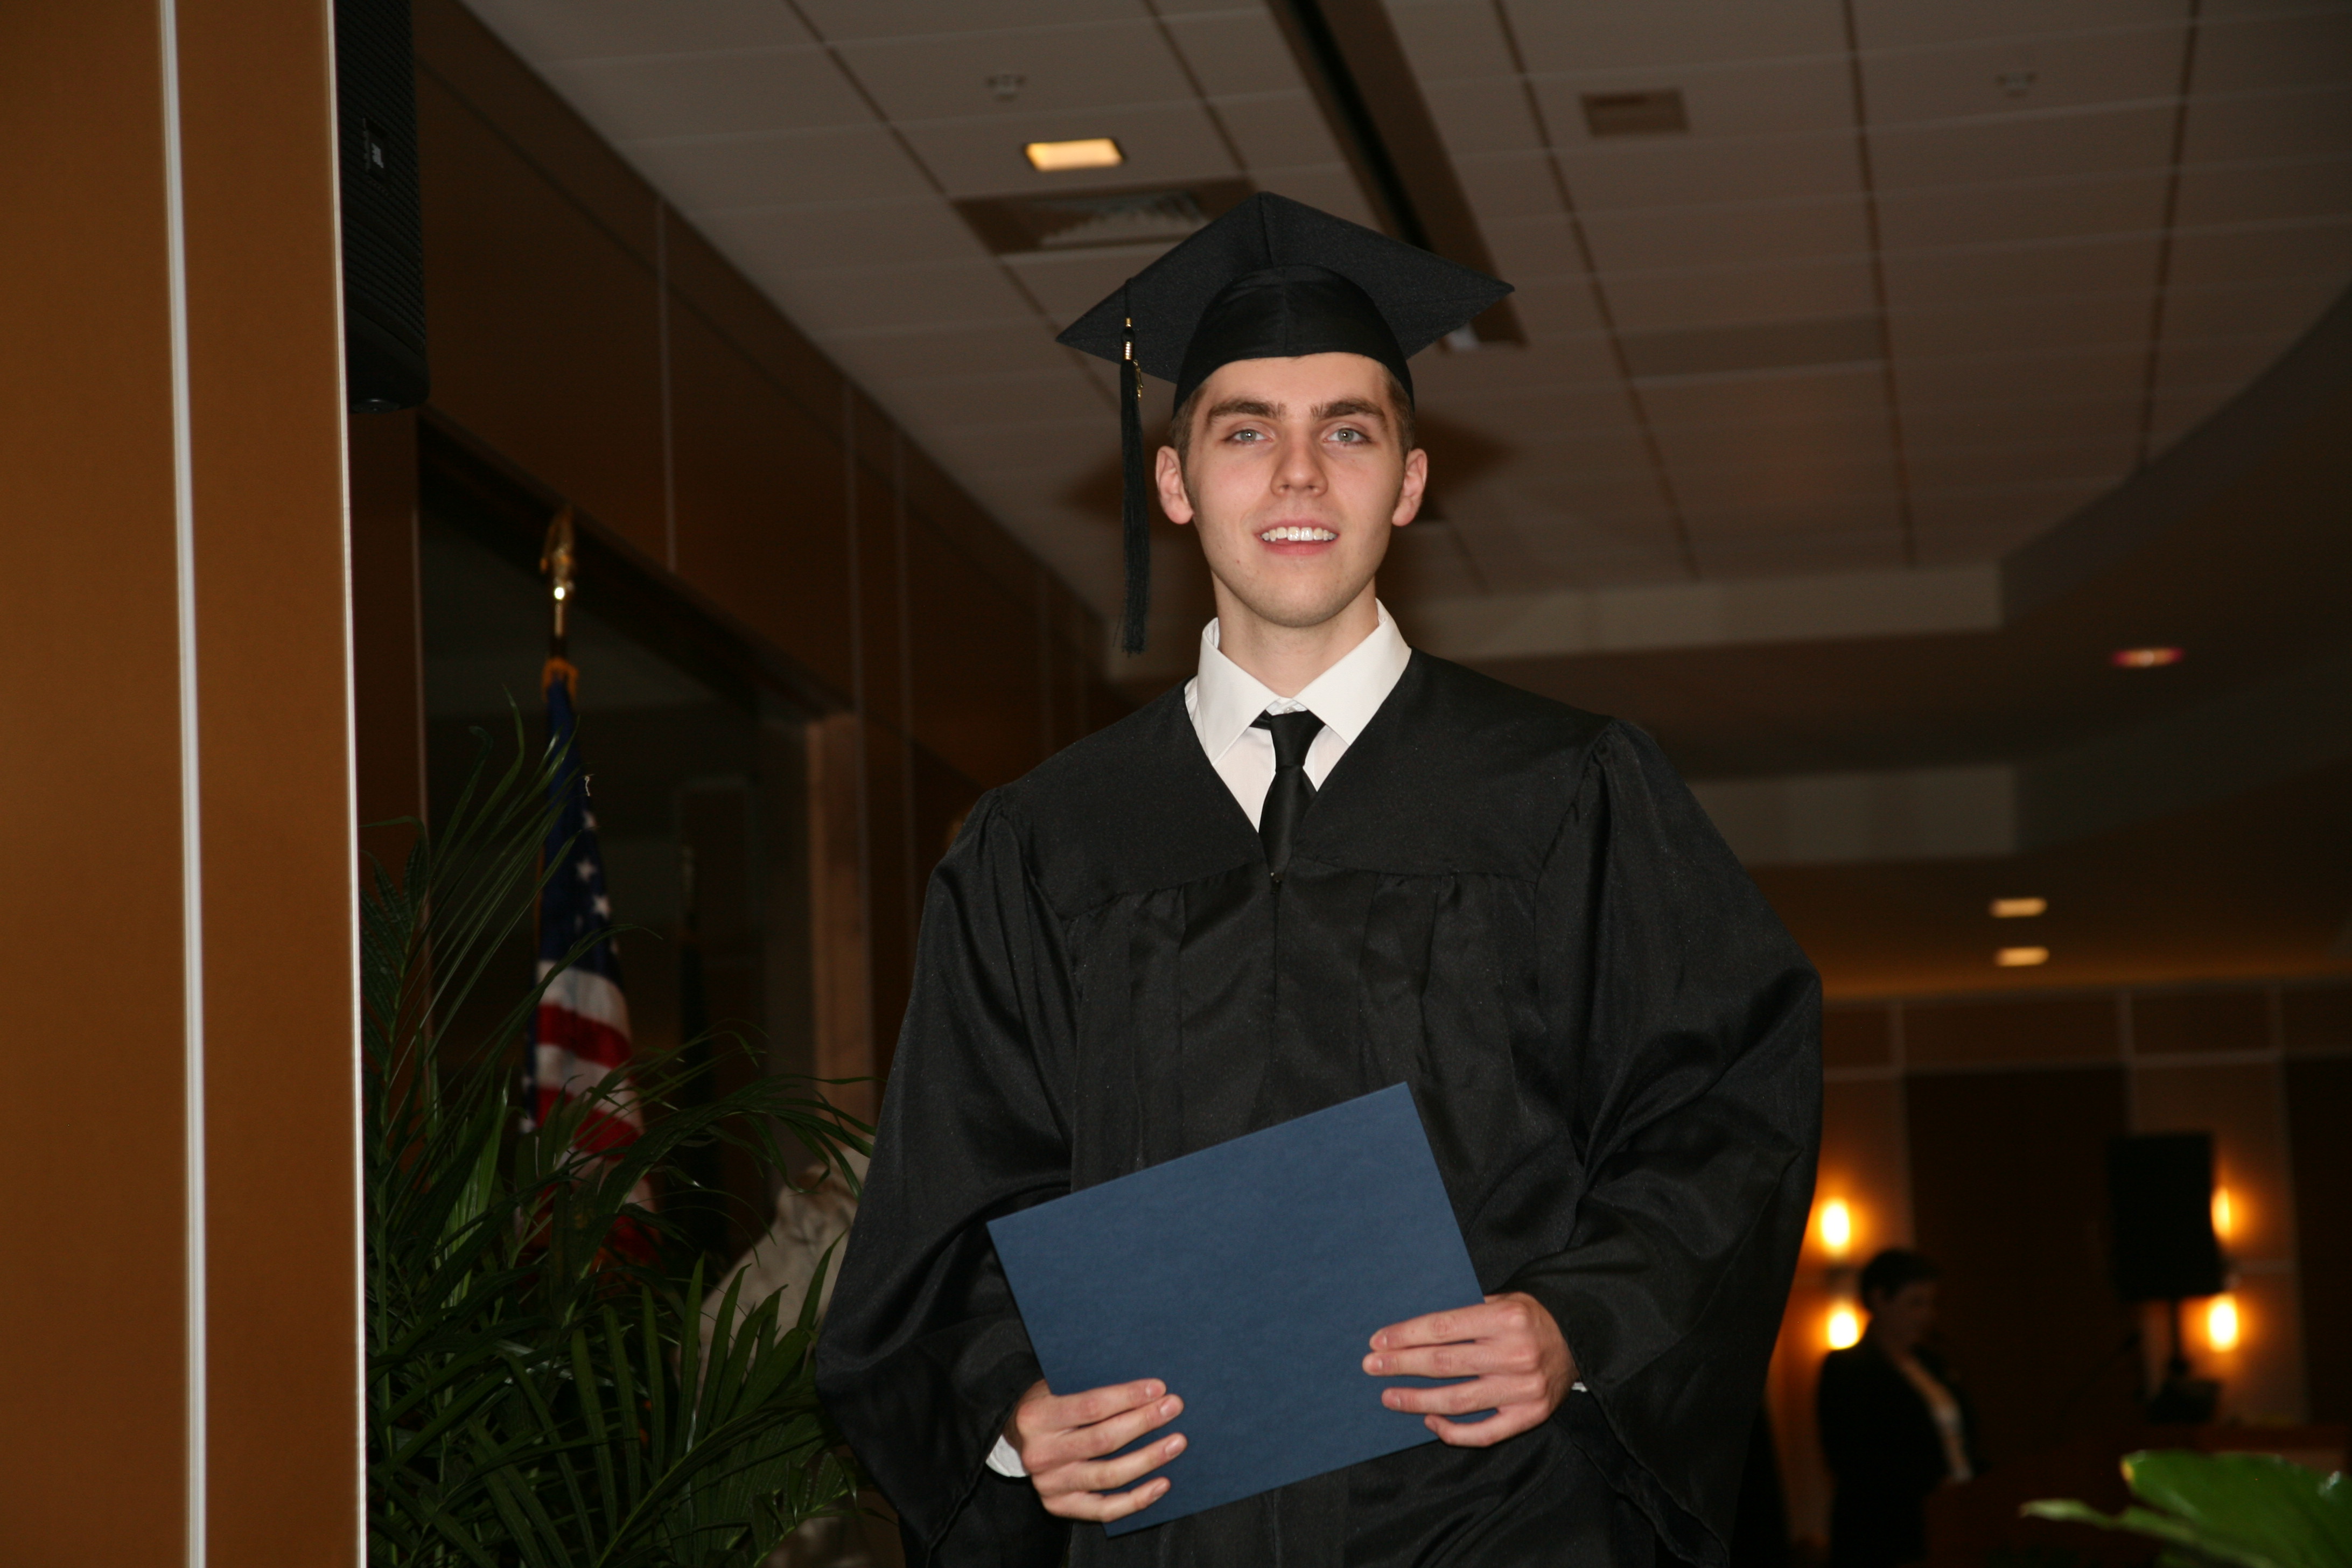 Chase Bailey celebrates after receiving his GED® diploma during GNTC’s 2016 GED® Commencement Ceremony.